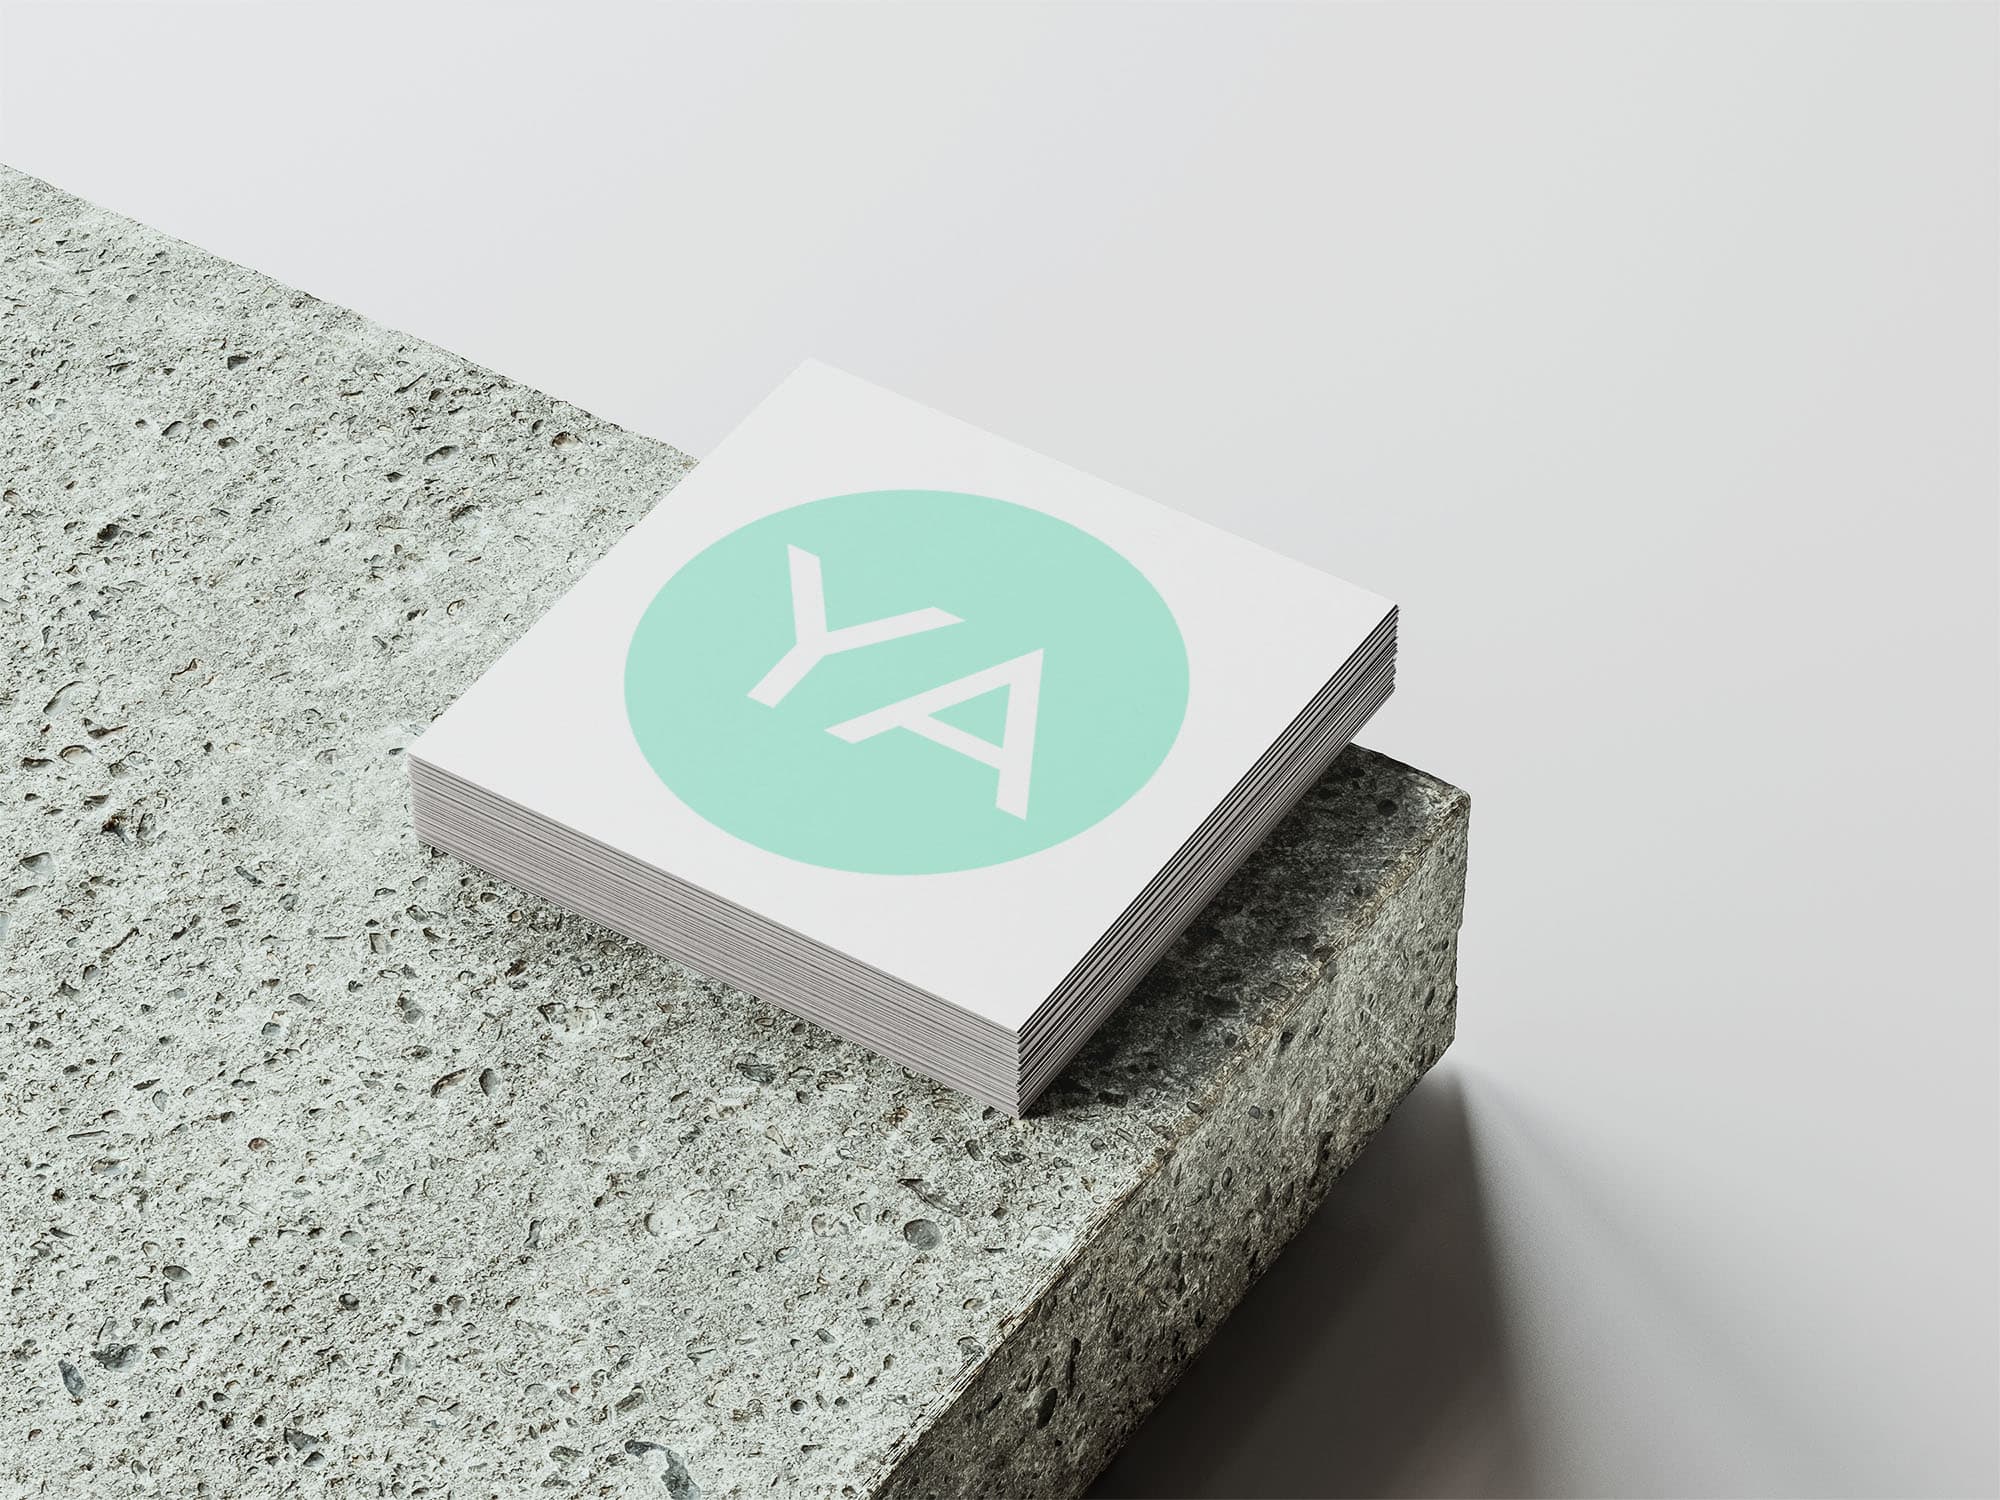 Logo for One Church's young adults ministry, 'YA', shown on a square business card.